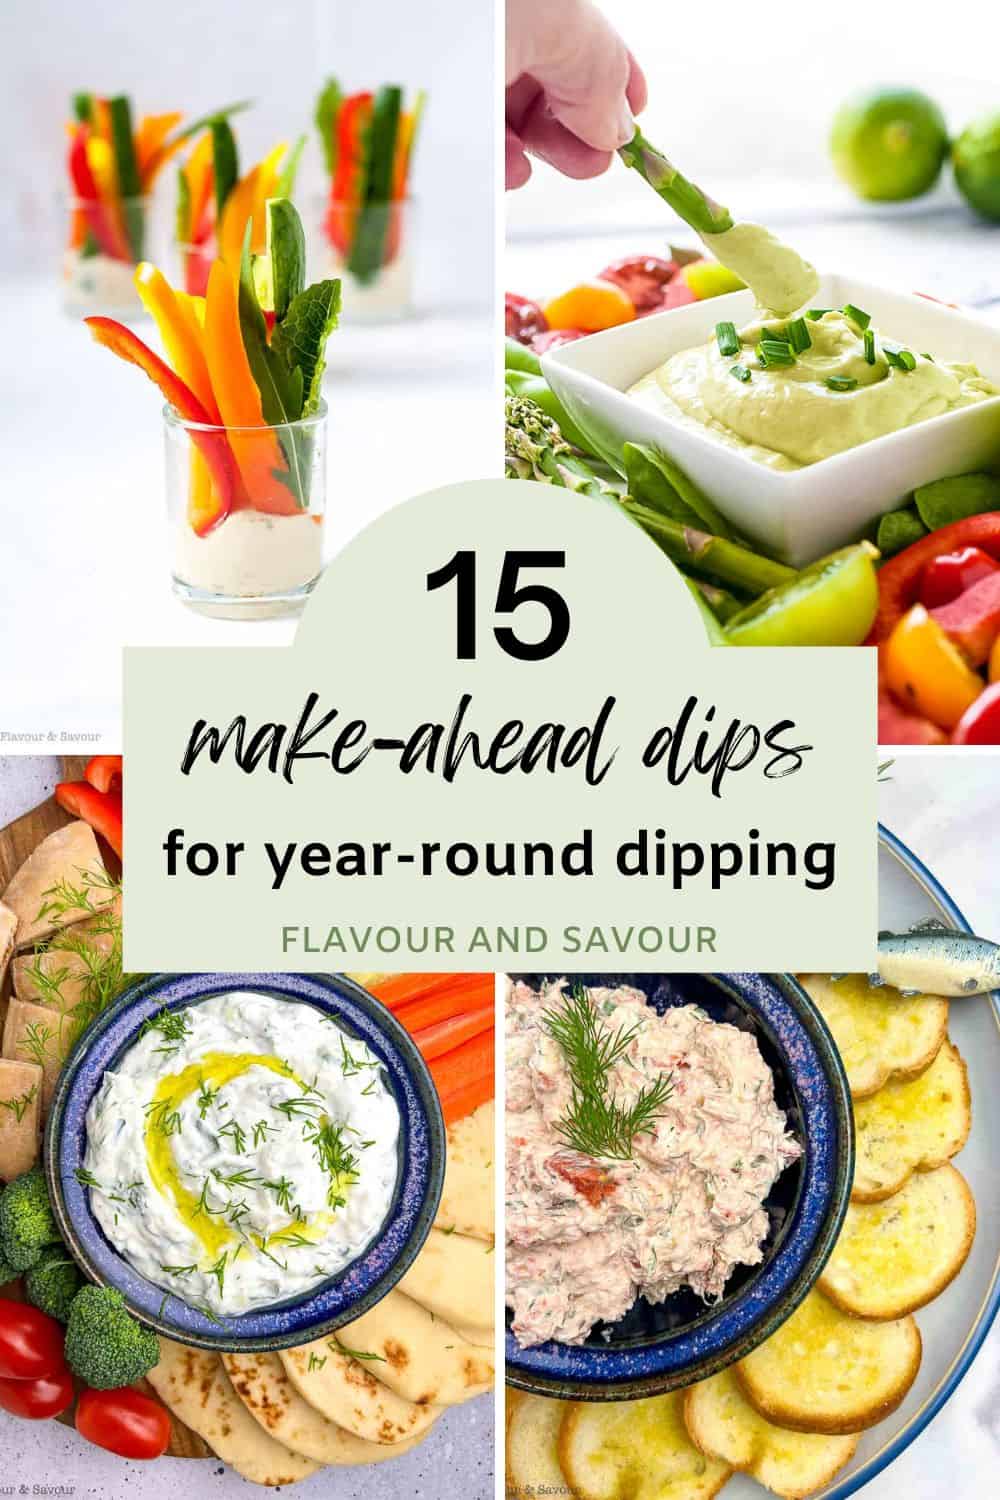 Image with text for 15 make-ahead dips for year-round dipping.